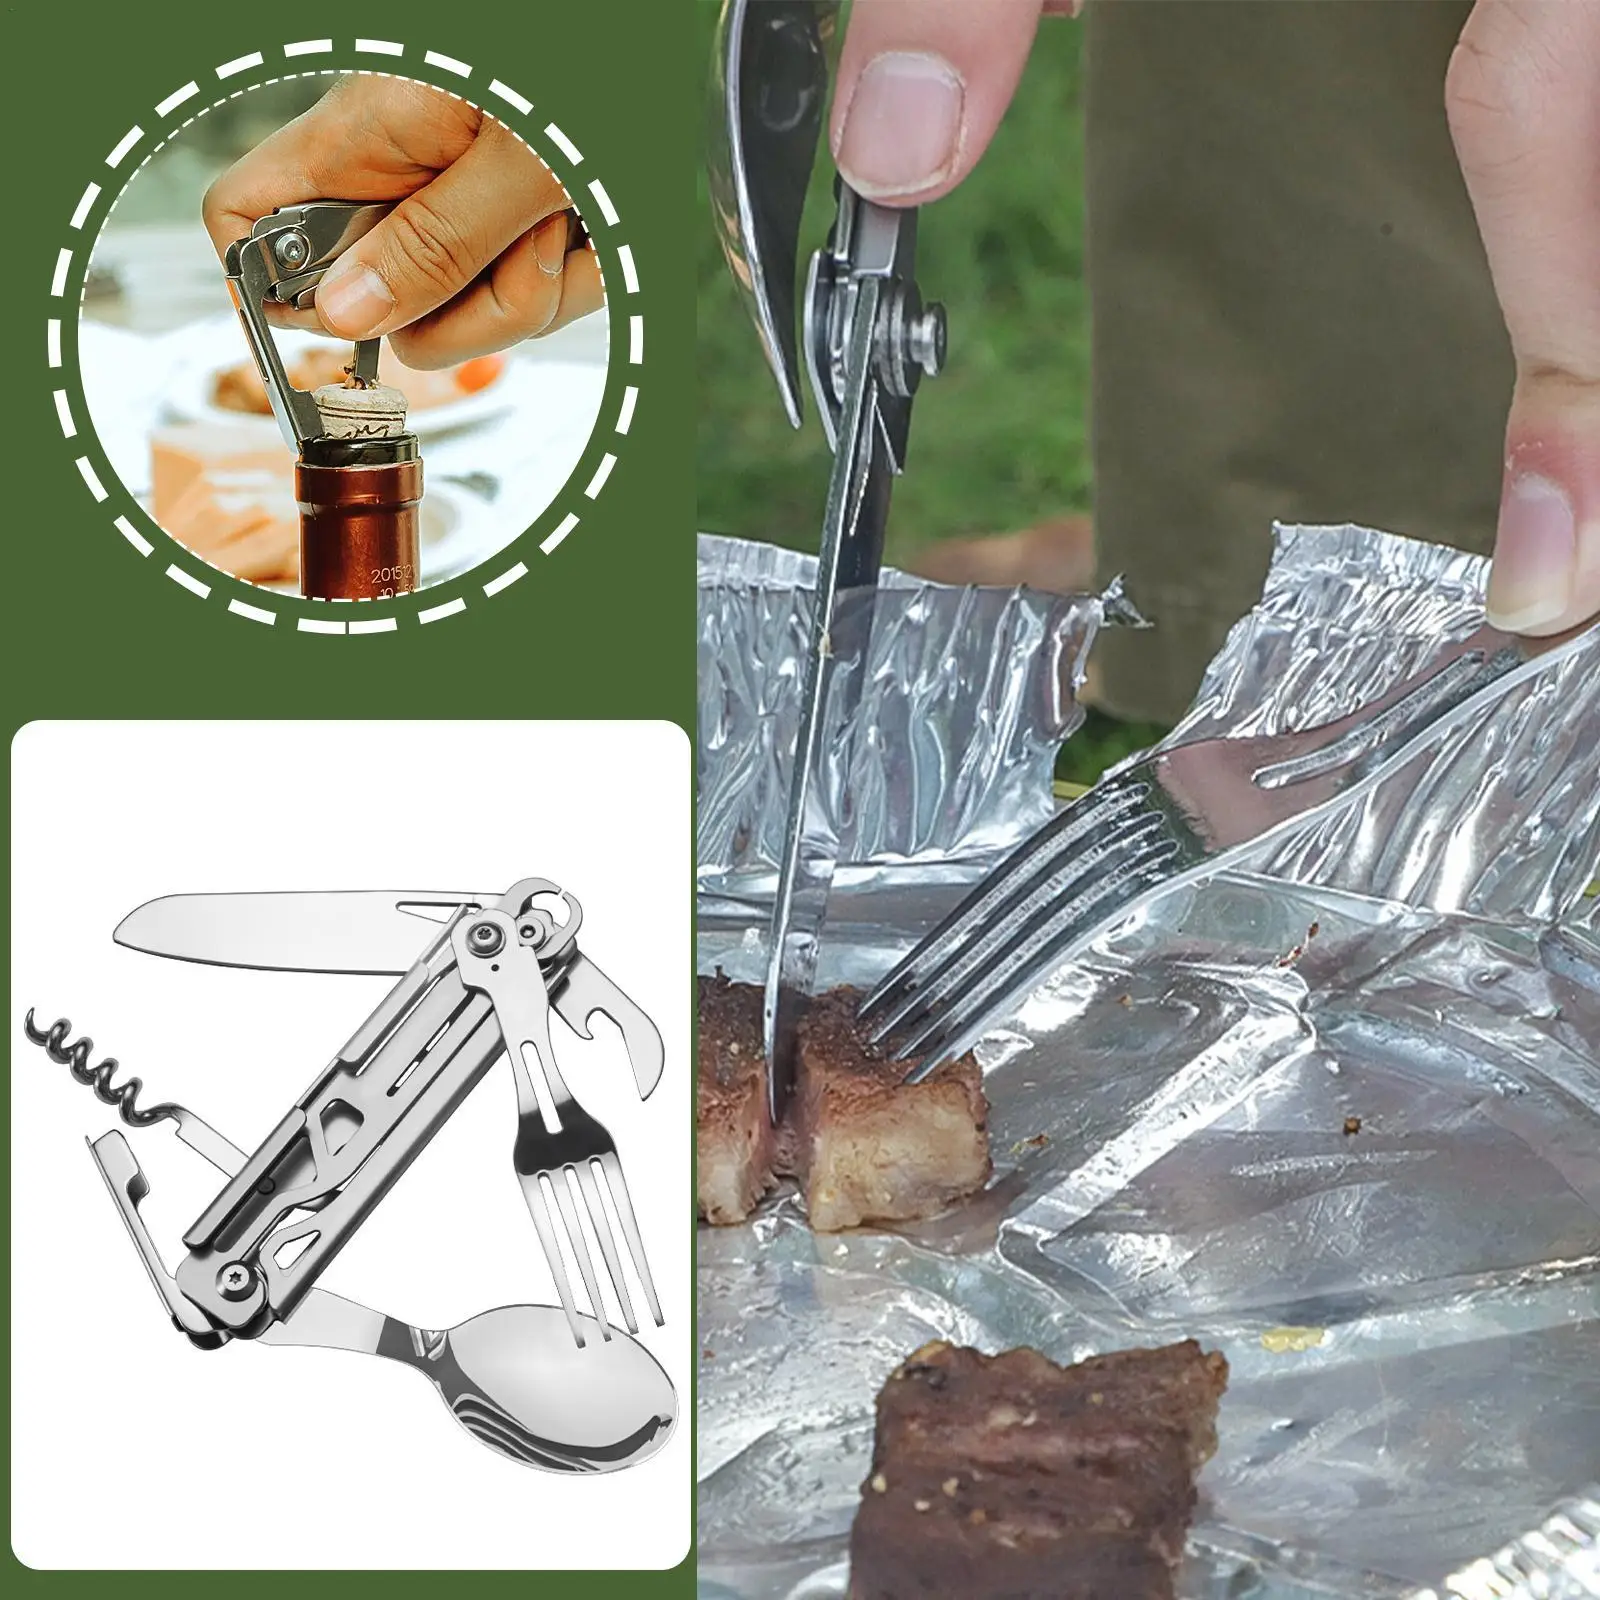 

Folding Cutlery Portable Corkscrew Tableware High Strength Stainless Steel Disassembly Camping Fork Spoon Cutter for Outdoor